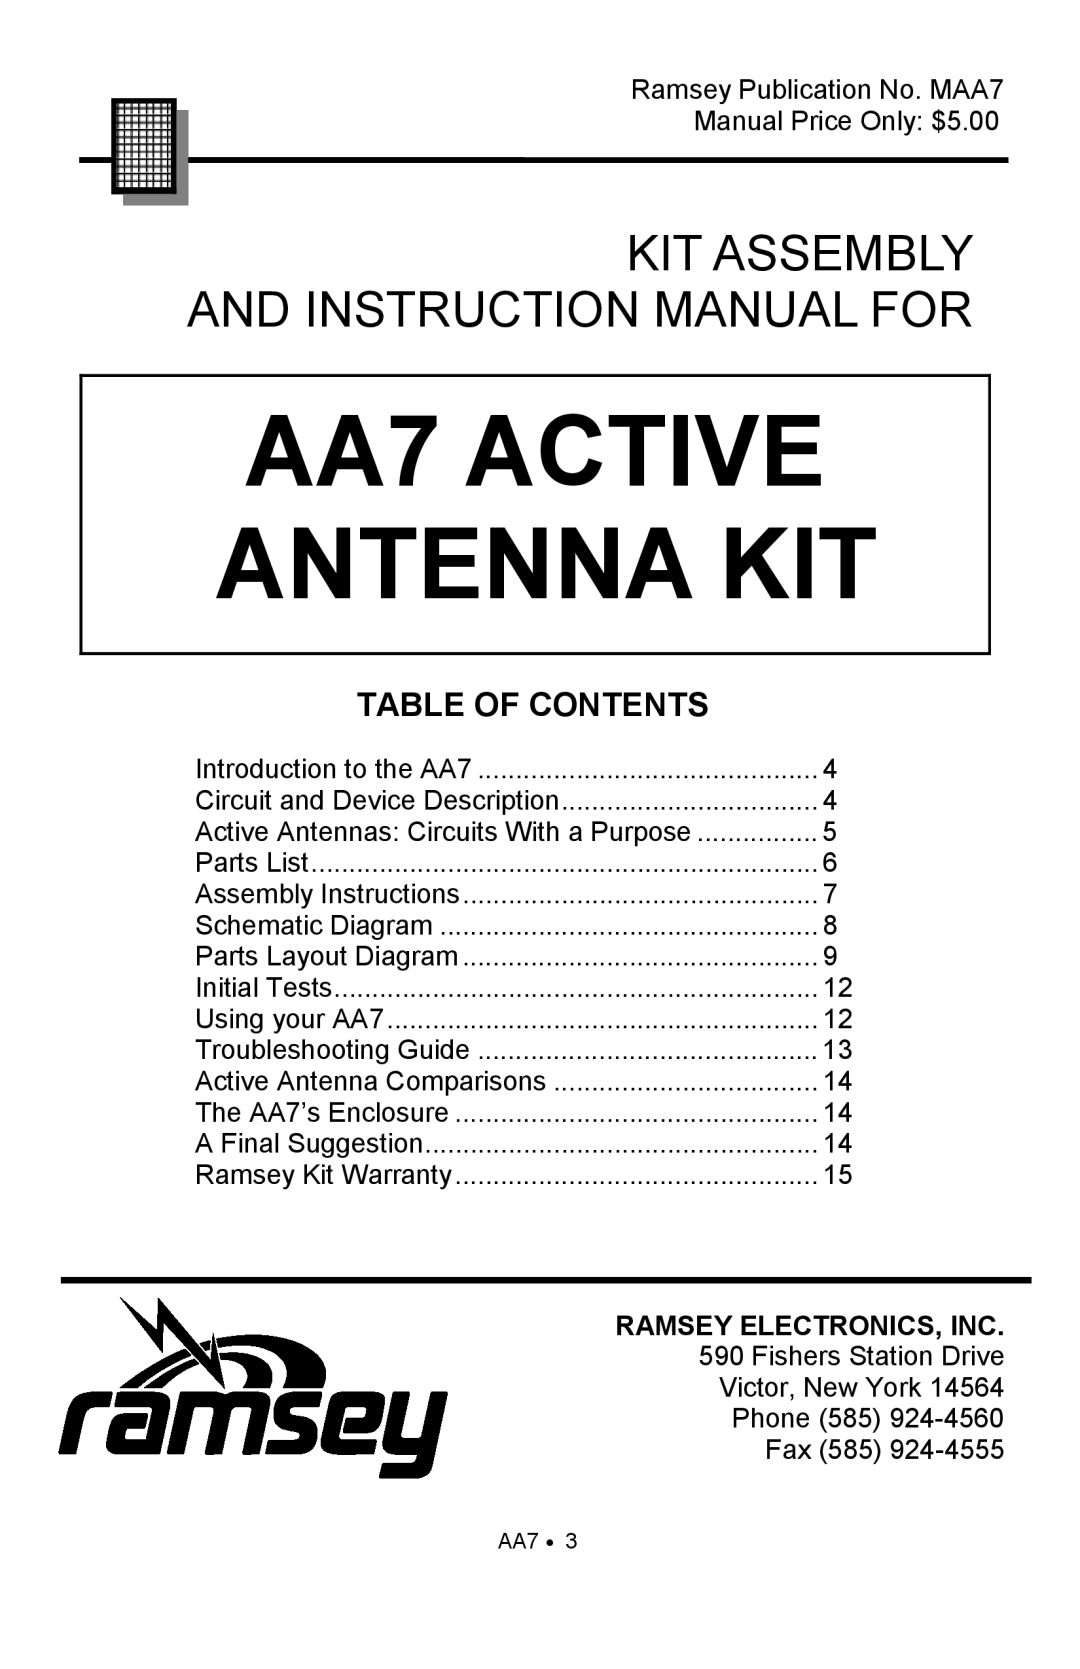 Ramsey Electronics manual Ramsey Electronics, Inc, AA7 ACTIVE ANTENNA KIT, Table Of Contents 